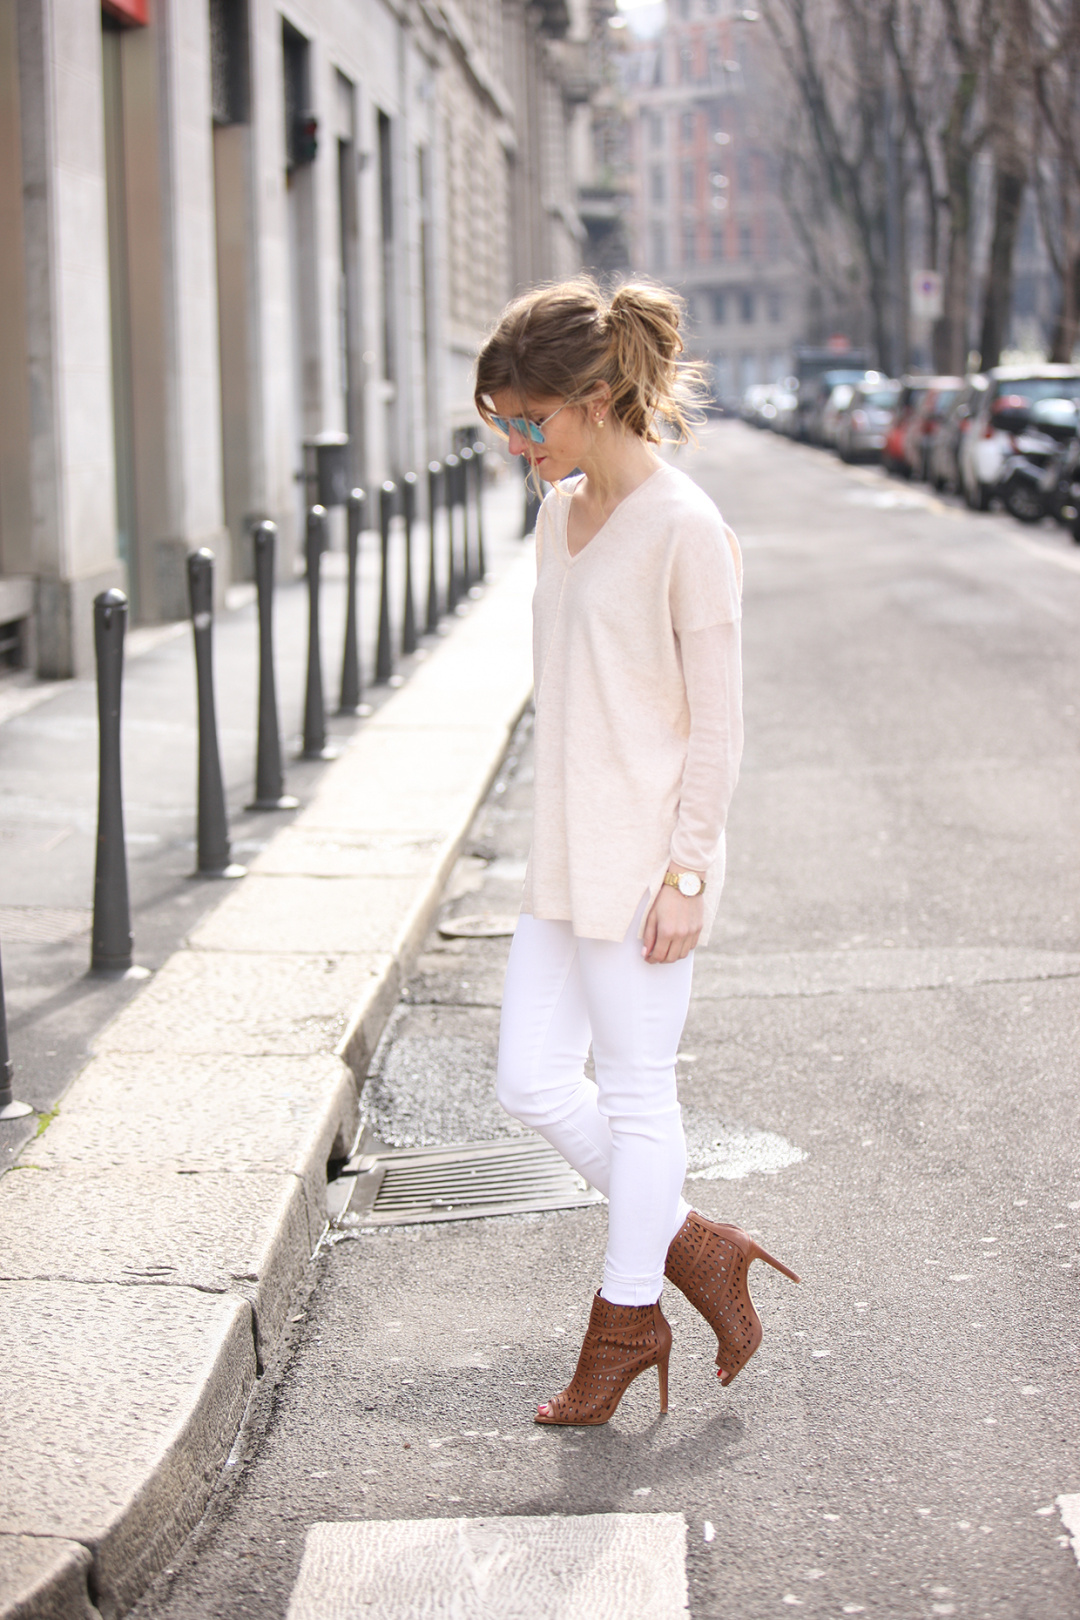 transitional fall look, spring outfit with white jeans, white jeans outfit, winter neutrals outfit, winter white outfit, wearing white after labor day, tone on tone outfit, white on white spring neutrals outfit